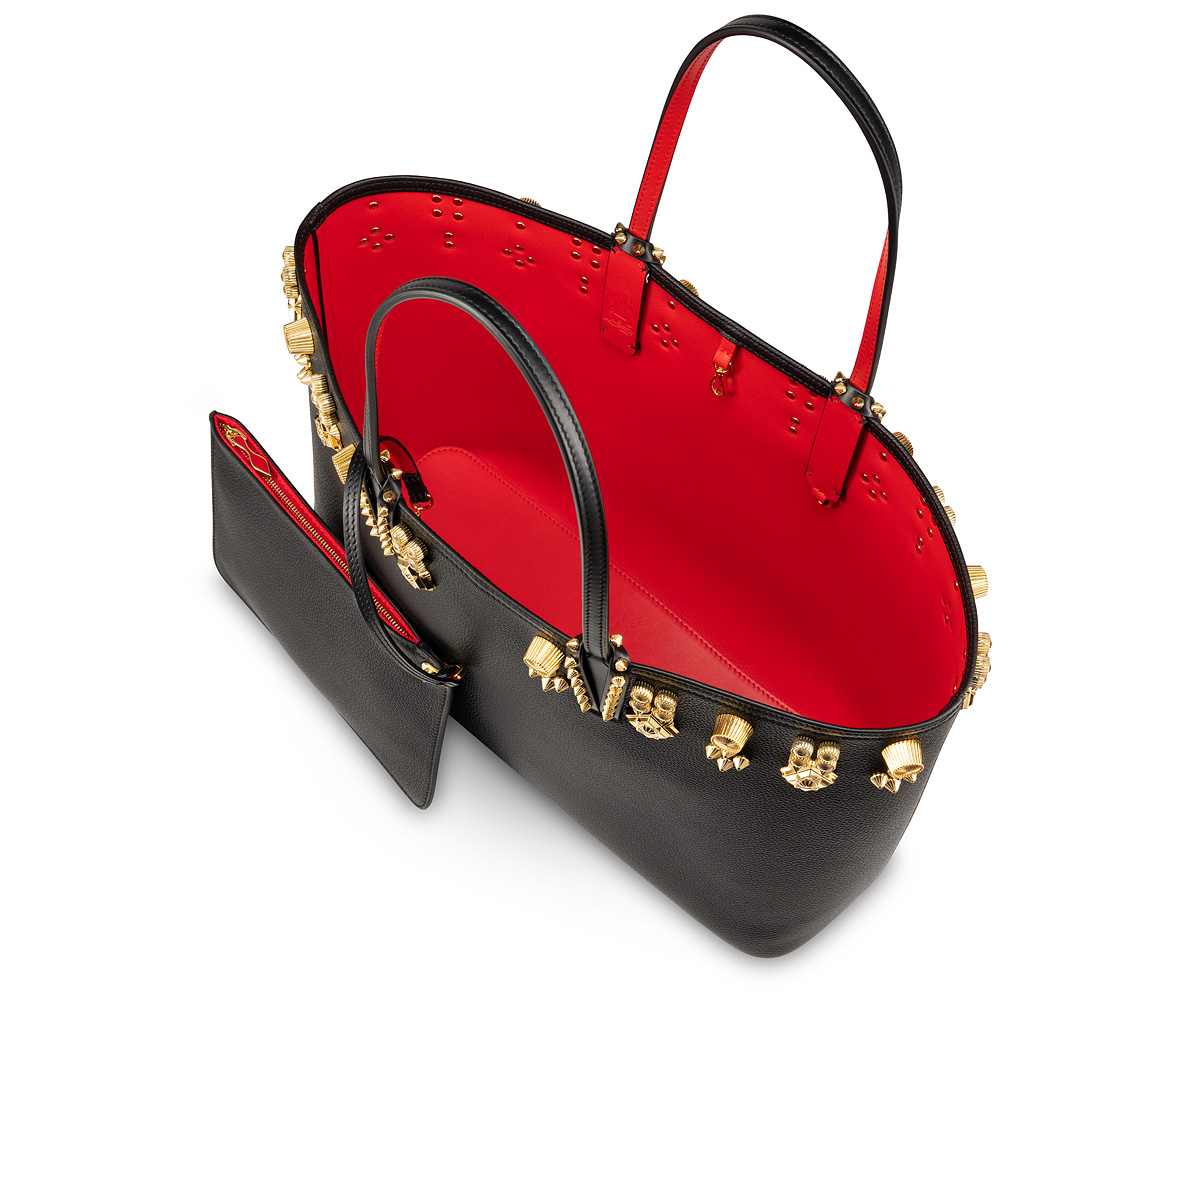 Cabata - Tote bag - Grained calf leather and spikes Couronnes Seville -  Black - Christian Louboutin